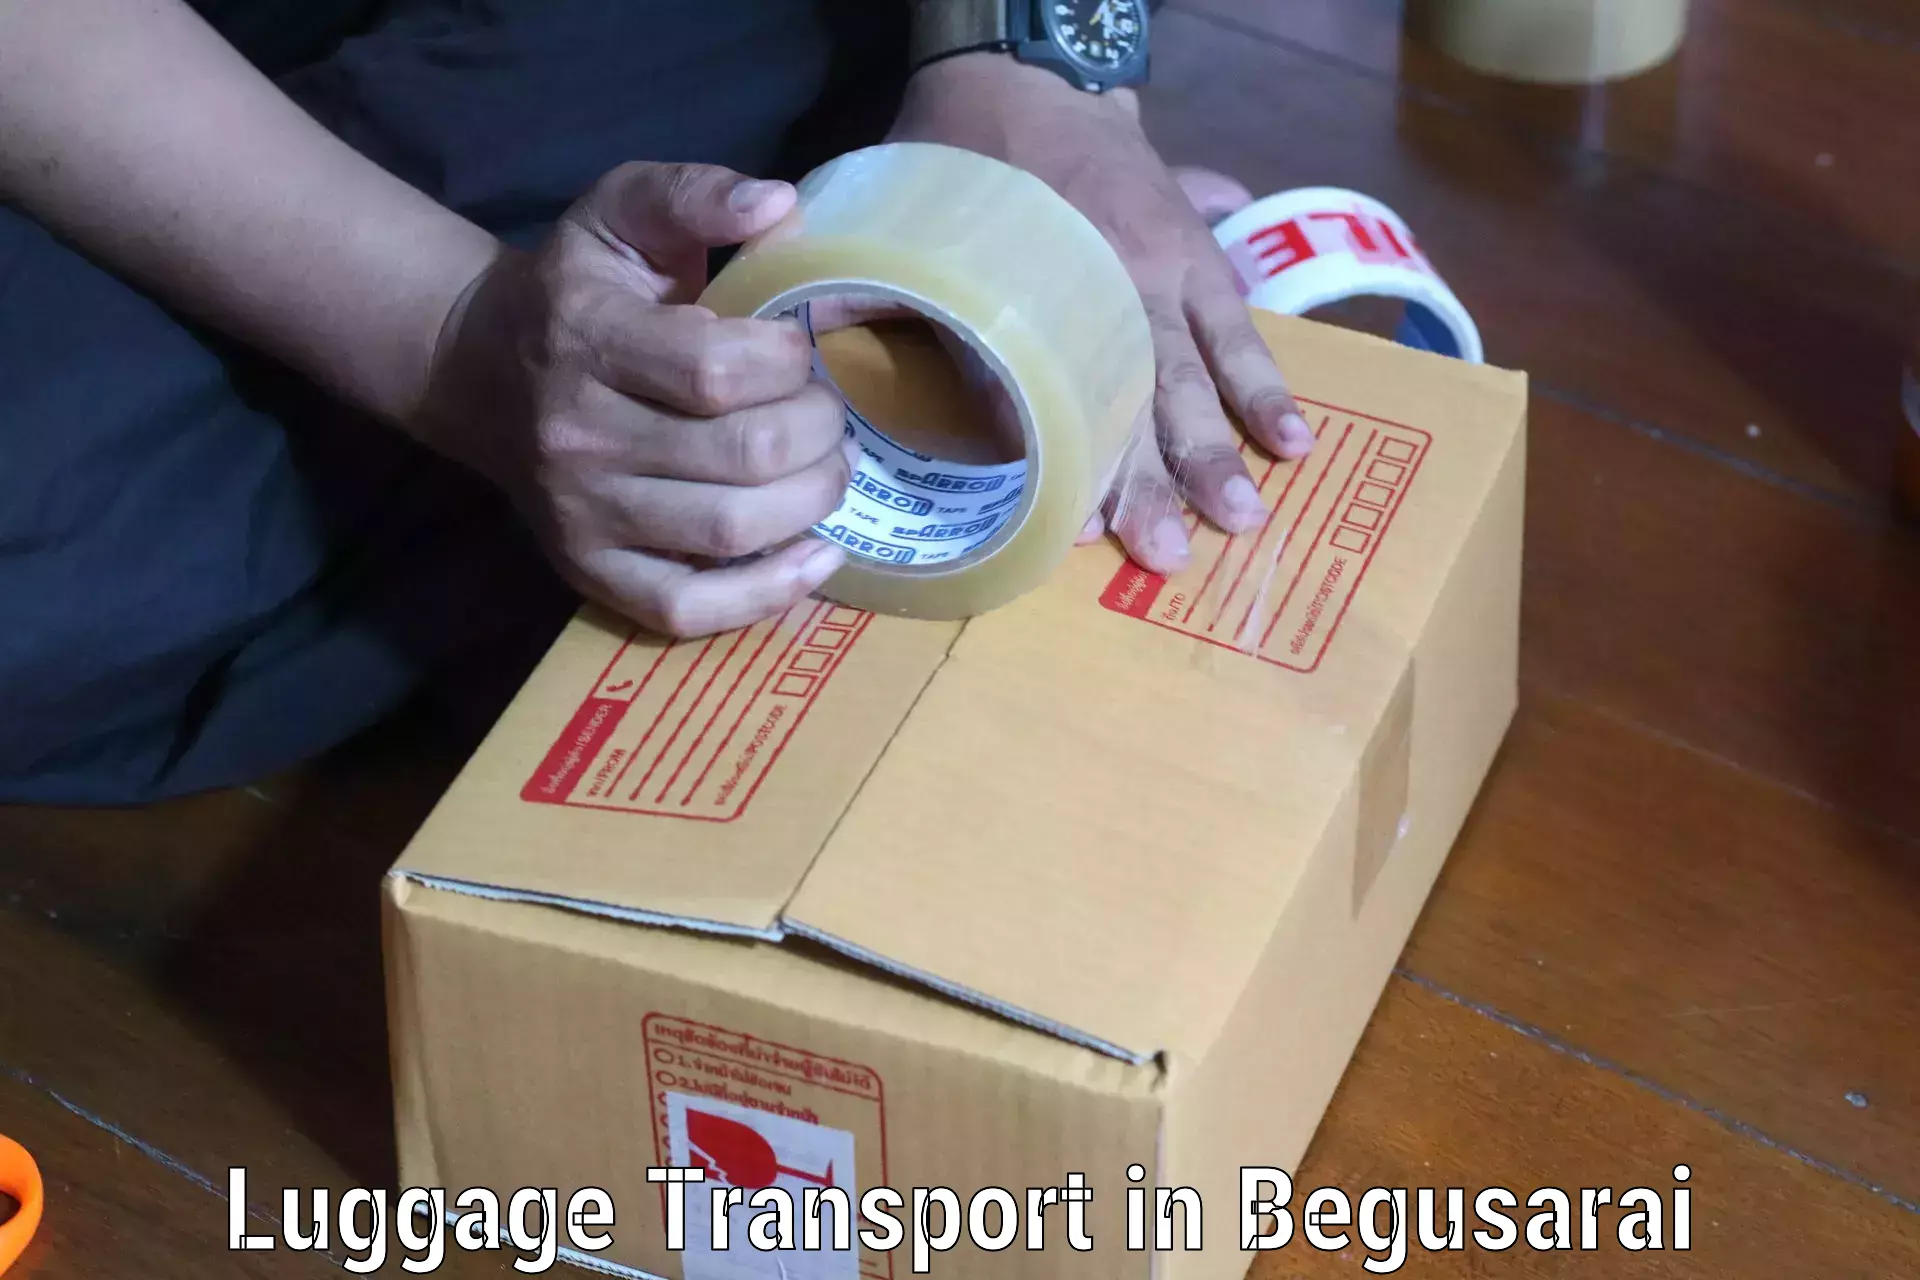 Baggage transport services in Begusarai